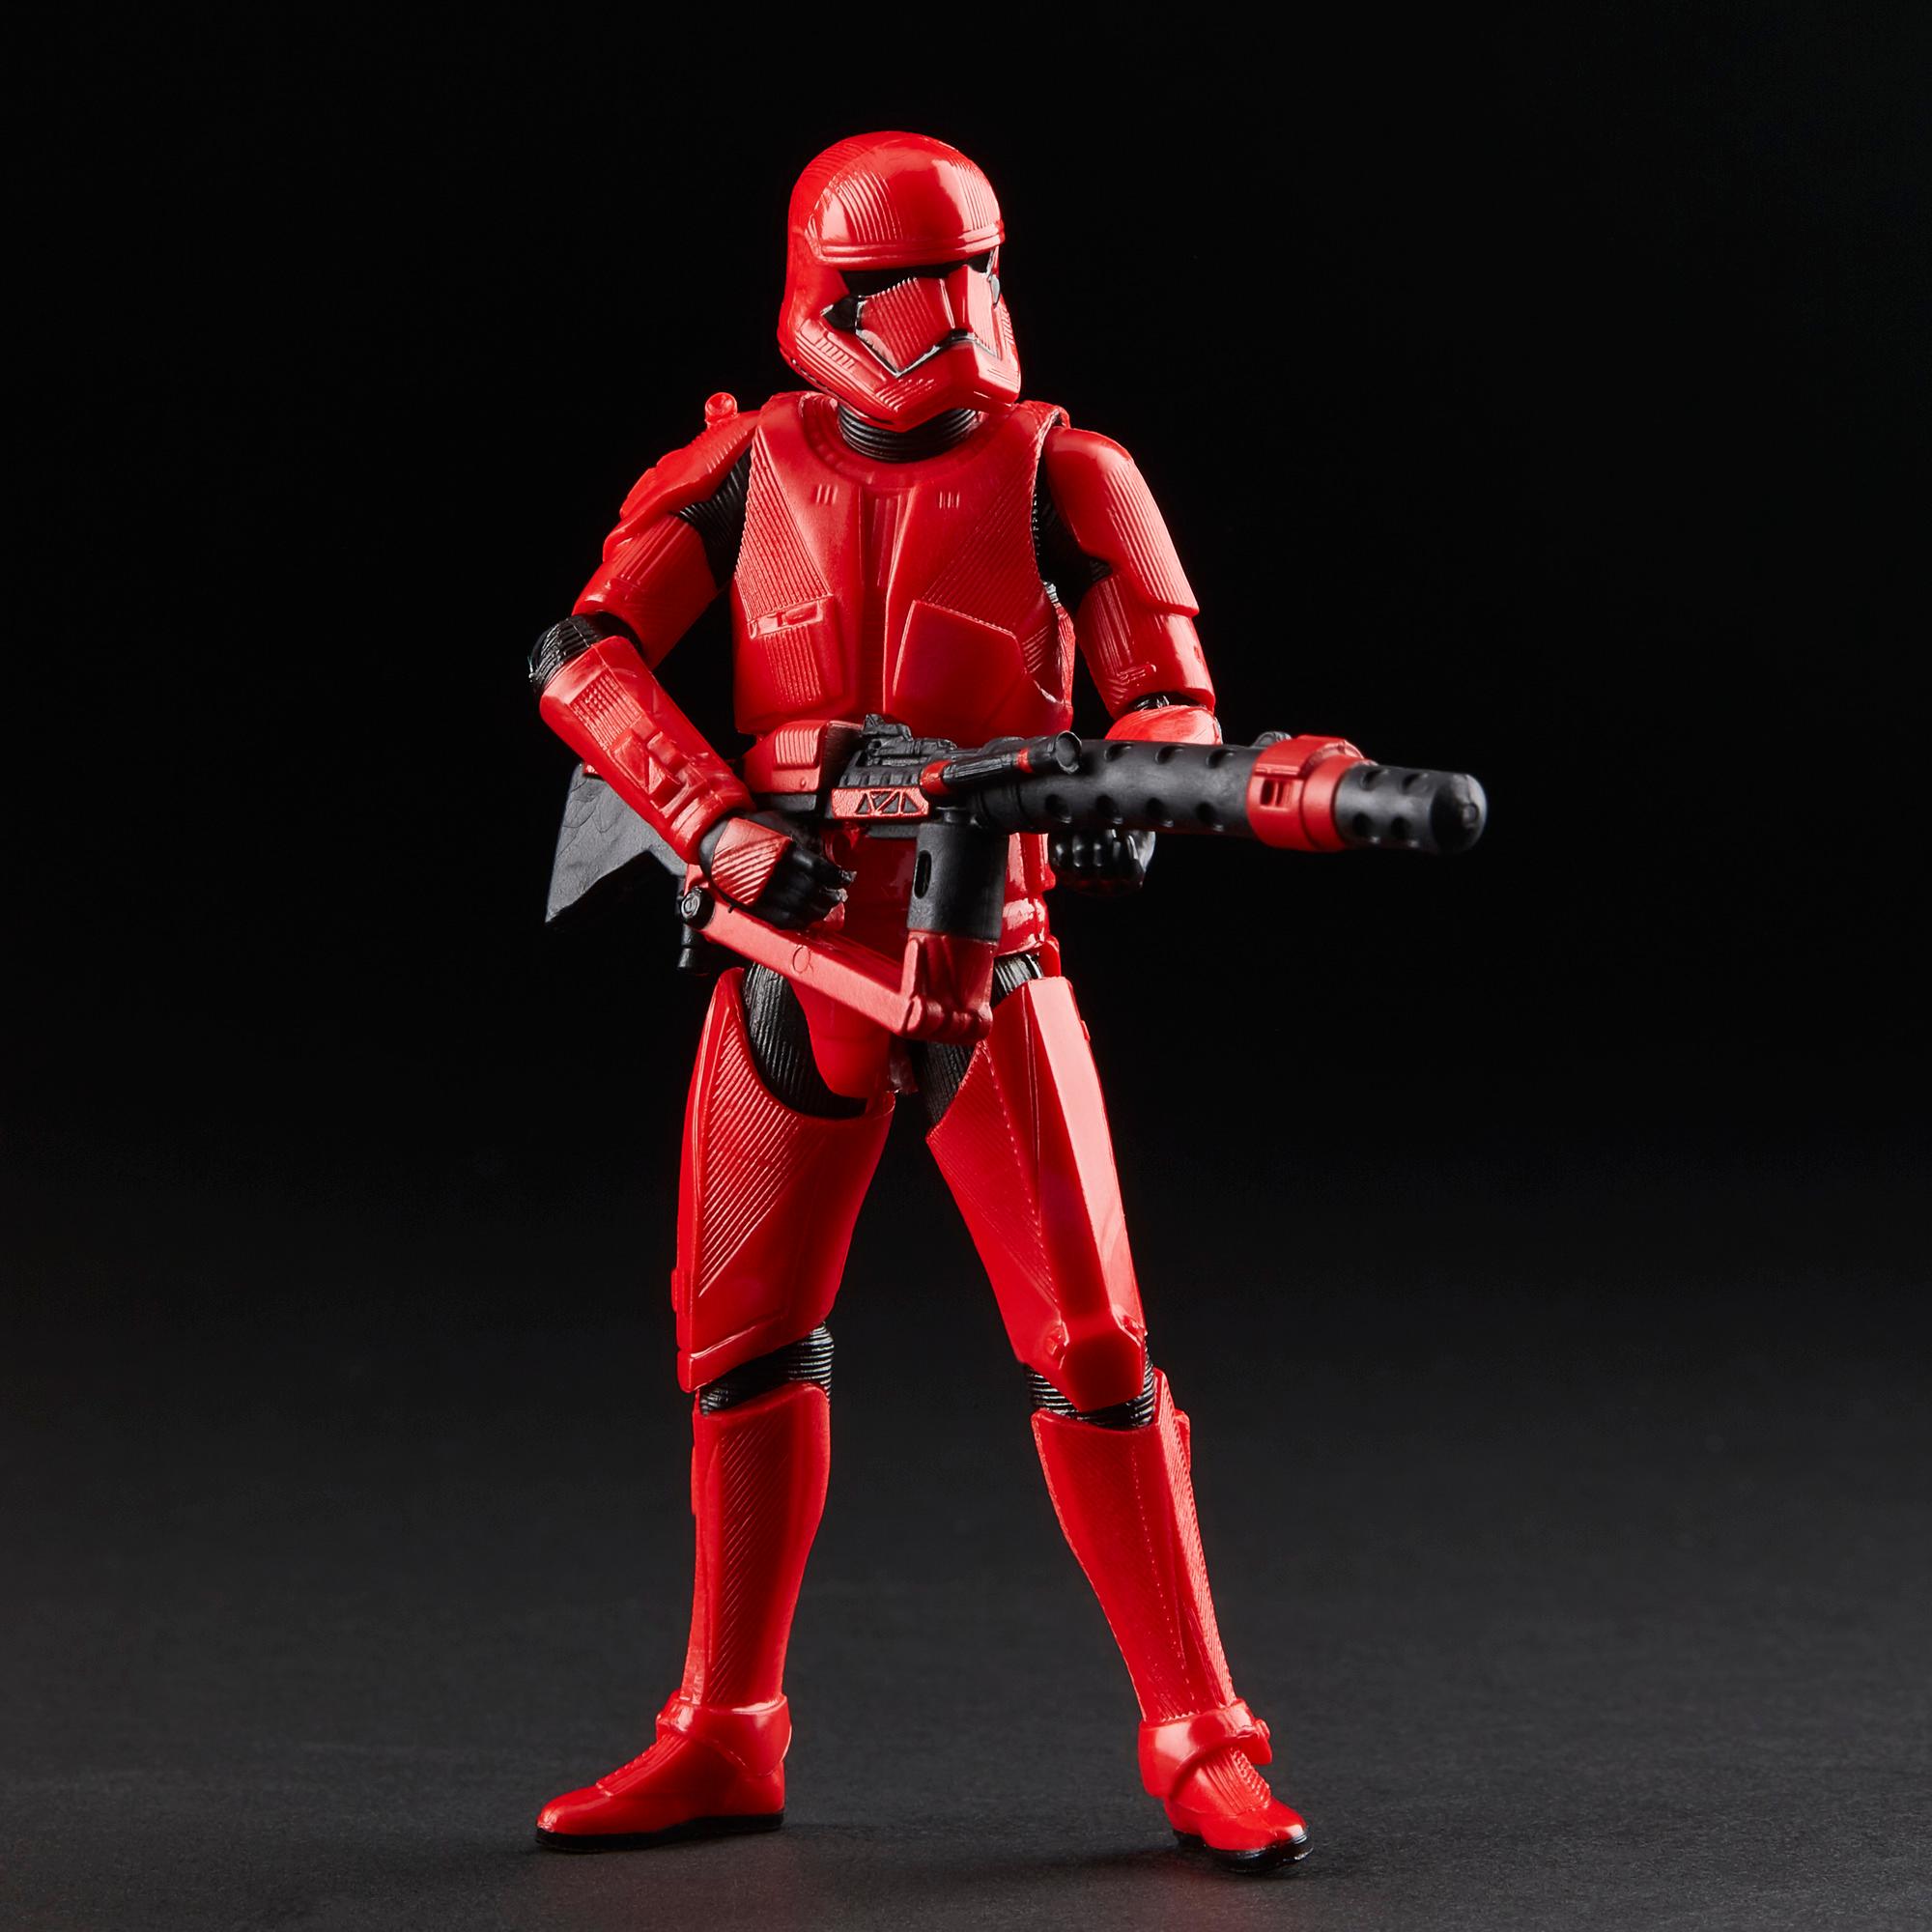 Star Wars E4078AS00 Sith Trooper Rise of Skywalke Action Figure for sale online